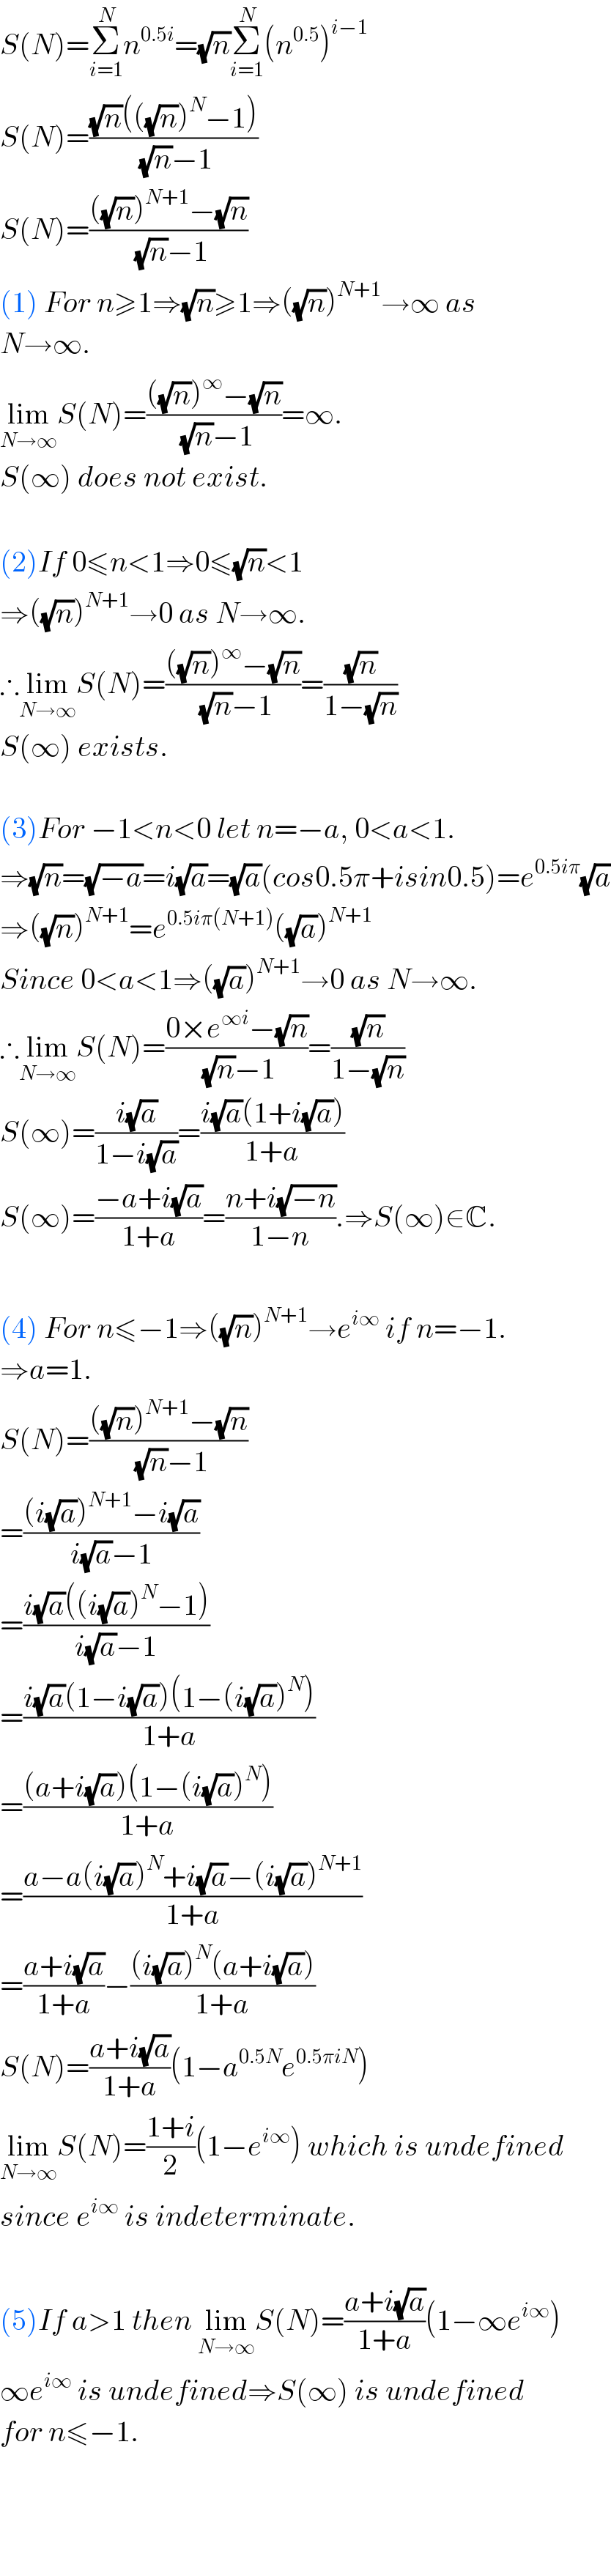 S(N)=Σ_(i=1) ^N n^(0.5i) =(√n)Σ_(i=1) ^N (n^(0.5) )^(i−1)   S(N)=(((√n)(((√n))^N −1))/((√n)−1))  S(N)=((((√n))^(N+1) −(√n))/((√n)−1))  (1) For n≥1⇒(√n)≥1⇒((√n))^(N+1) →∞ as   N→∞.  lim_(N→∞) S(N)=((((√n))^∞ −(√n))/((√n)−1))=∞.  S(∞) does not exist.     (2)If 0≤n<1⇒0≤(√n)<1  ⇒((√n))^(N+1) →0 as N→∞.  ∴lim_(N→∞) S(N)=((((√n))^∞ −(√n))/((√n)−1))=((√n)/(1−(√n)))  S(∞) exists.    (3)For −1<n<0 let n=−a, 0<a<1.  ⇒(√n)=(√(−a))=i(√a)=(√a)(cos0.5π+isin0.5)=e^(0.5iπ) (√a)  ⇒((√n))^(N+1) =e^(0.5iπ(N+1)) ((√a))^(N+1)   Since 0<a<1⇒((√a))^(N+1) →0 as N→∞.  ∴lim_(N→∞) S(N)=((0×e^(∞i) −(√n))/((√n)−1))=((√n)/(1−(√n)))  S(∞)=((i(√a))/(1−i(√a)))=((i(√a)(1+i(√a)))/(1+a))  S(∞)=((−a+i(√a))/(1+a))=((n+i(√(−n)))/(1−n)).⇒S(∞)∈C.    (4) For n≤−1⇒((√n))^(N+1) →e^(i∞)  if n=−1.  ⇒a=1.  S(N)=((((√n))^(N+1) −(√n))/((√n)−1))  =(((i(√a))^(N+1) −i(√a))/(i(√a)−1))  =((i(√a)((i(√a))^N −1))/(i(√a)−1))  =((i(√a)(1−i(√a))(1−(i(√a))^N ))/(1+a))  =(((a+i(√a))(1−(i(√a))^N ))/(1+a))  =((a−a(i(√a))^N +i(√a)−(i(√a))^(N+1) )/(1+a))  =((a+i(√a))/(1+a))−(((i(√a))^N (a+i(√a)))/(1+a))  S(N)=((a+i(√a))/(1+a))(1−a^(0.5N) e^(0.5πiN) )  lim_(N→∞) S(N)=((1+i)/2)(1−e^(i∞) ) which is undefined  since e^(i∞)  is indeterminate.    (5)If a>1 then lim_(N→∞) S(N)=((a+i(√a))/(1+a))(1−∞e^(i∞) )  ∞e^(i∞)  is undefined⇒S(∞) is undefined  for n≤−1.        